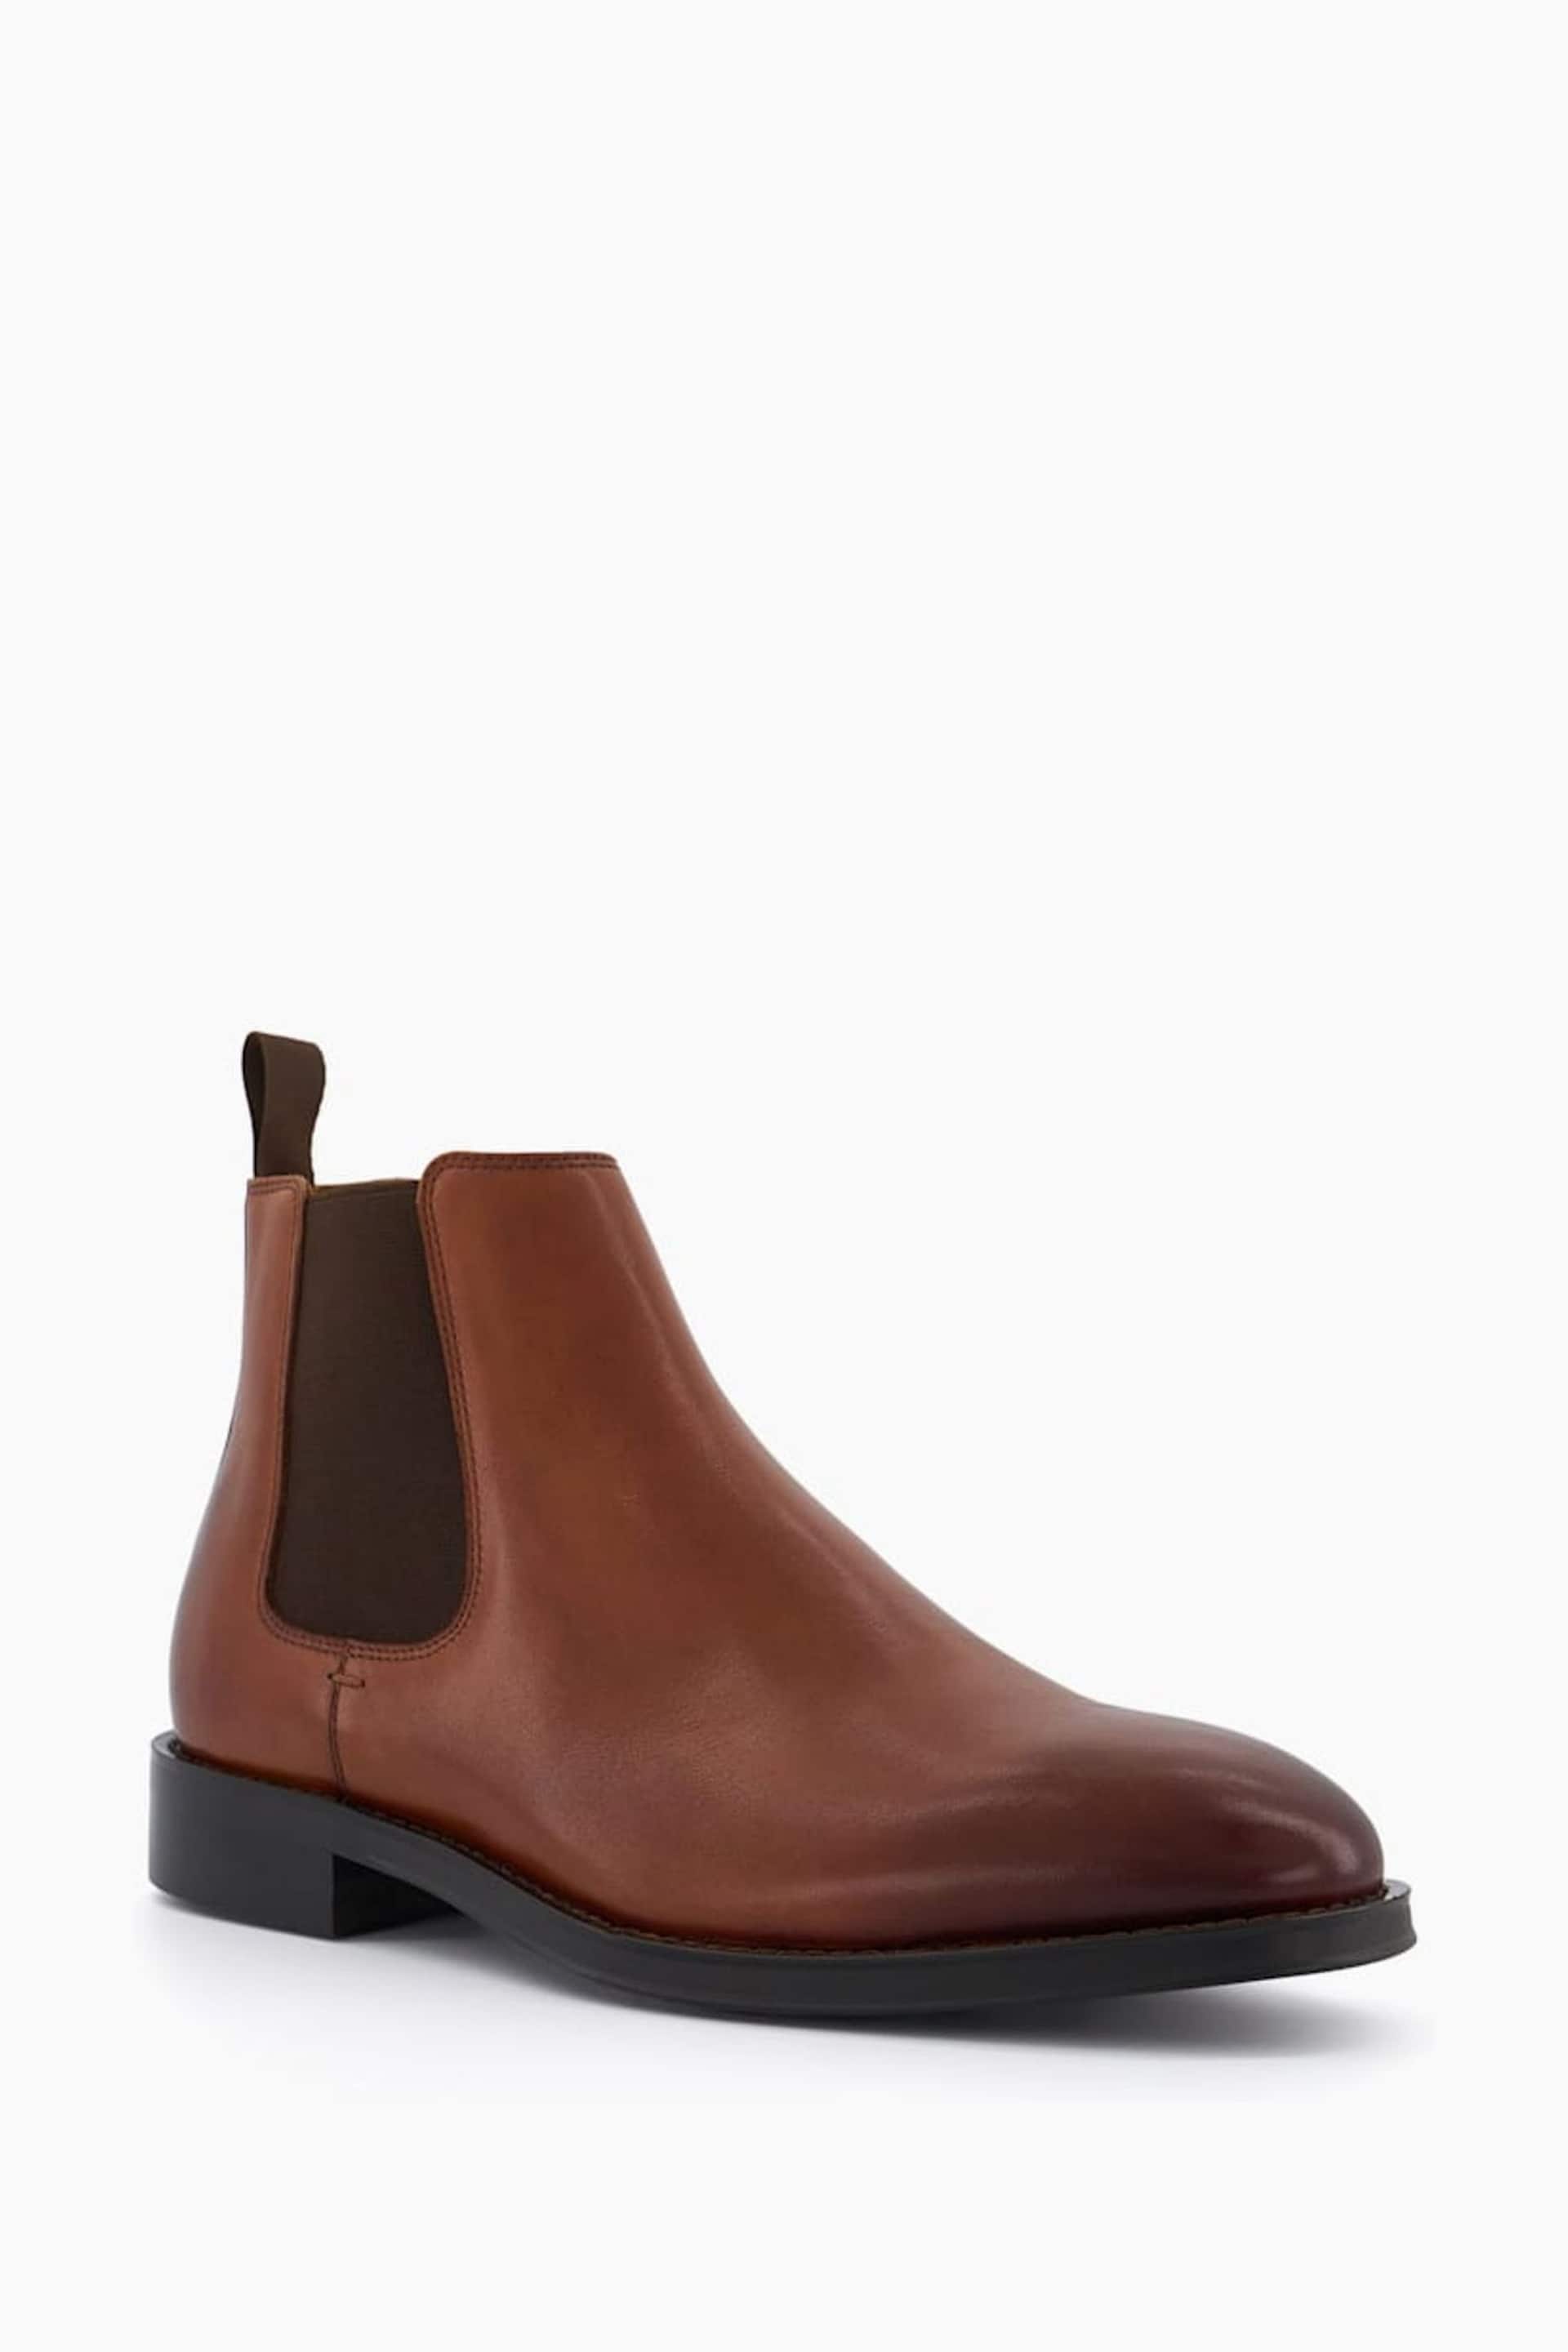 Dune London Brown Masons Sole Chelsea Boots - Image 3 of 5